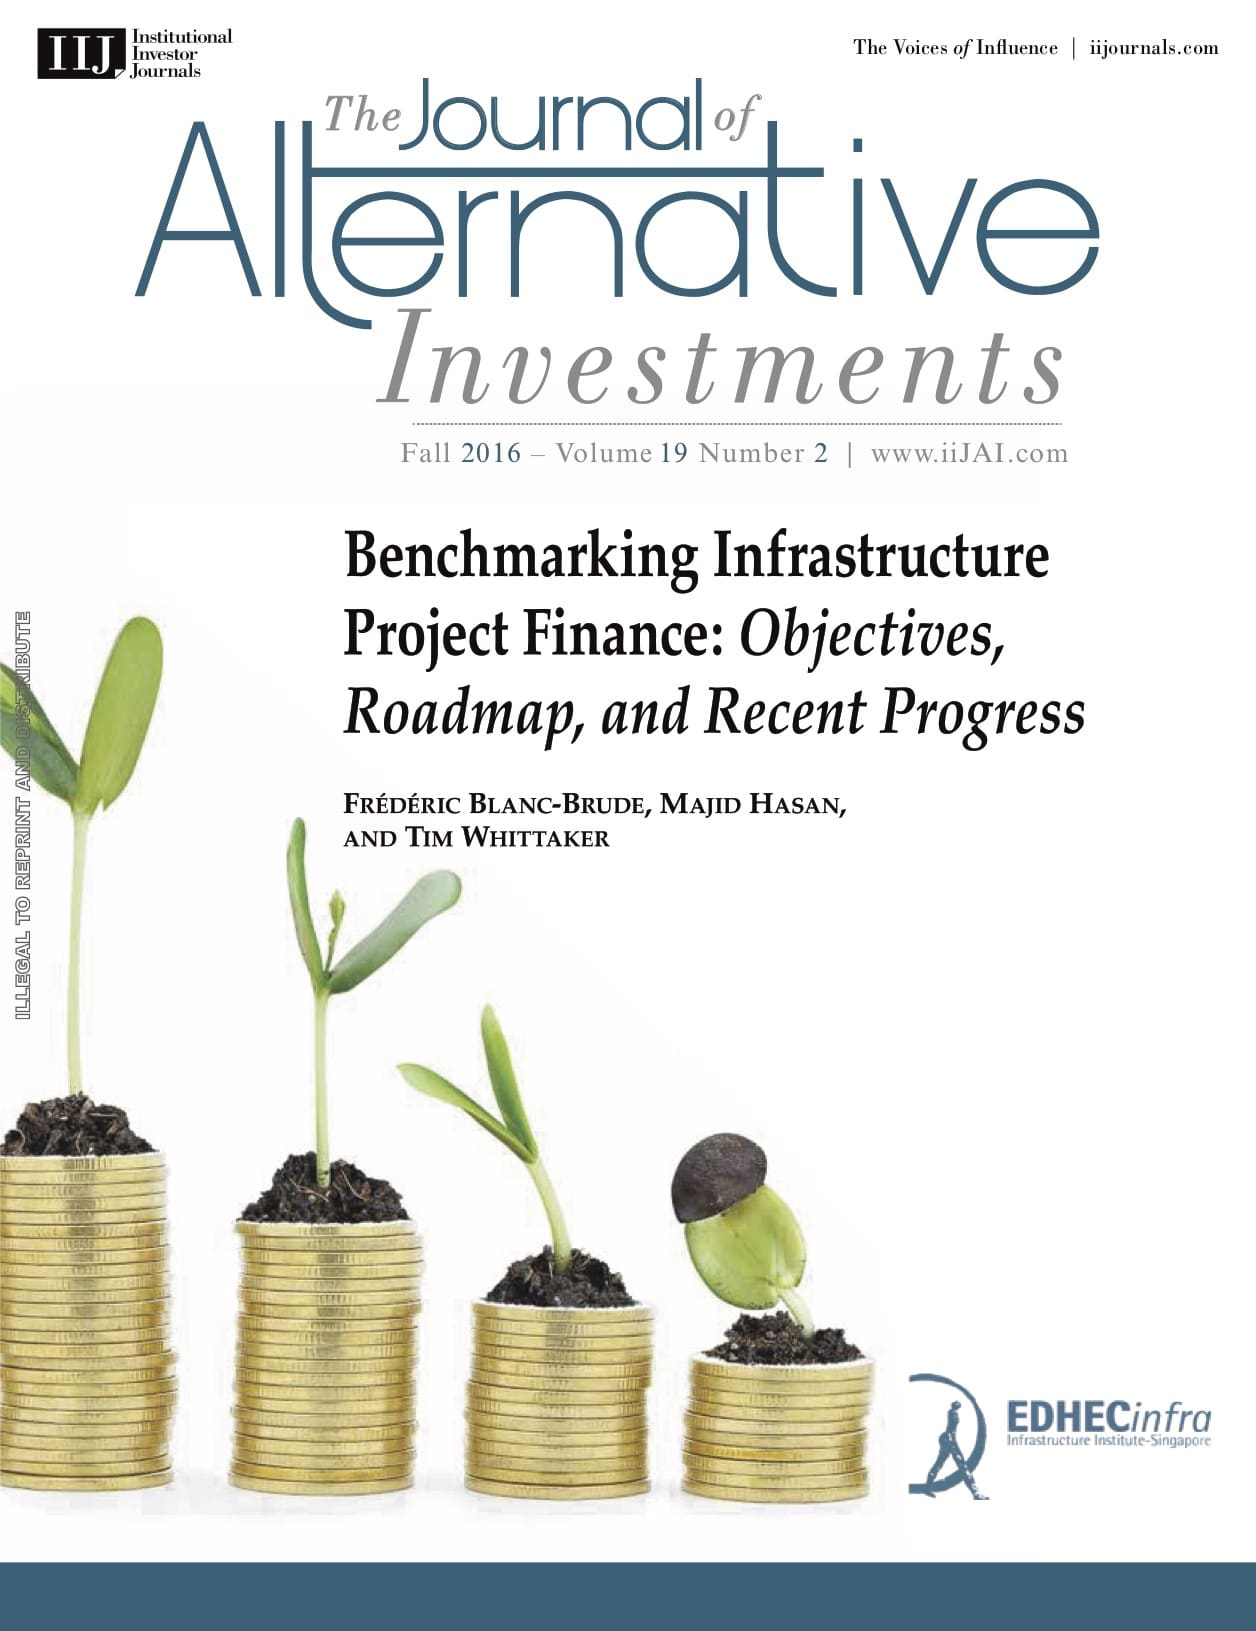 Benchmarking Infrastructure Project Finance: Objectives, Roadmap, and Recent Progress